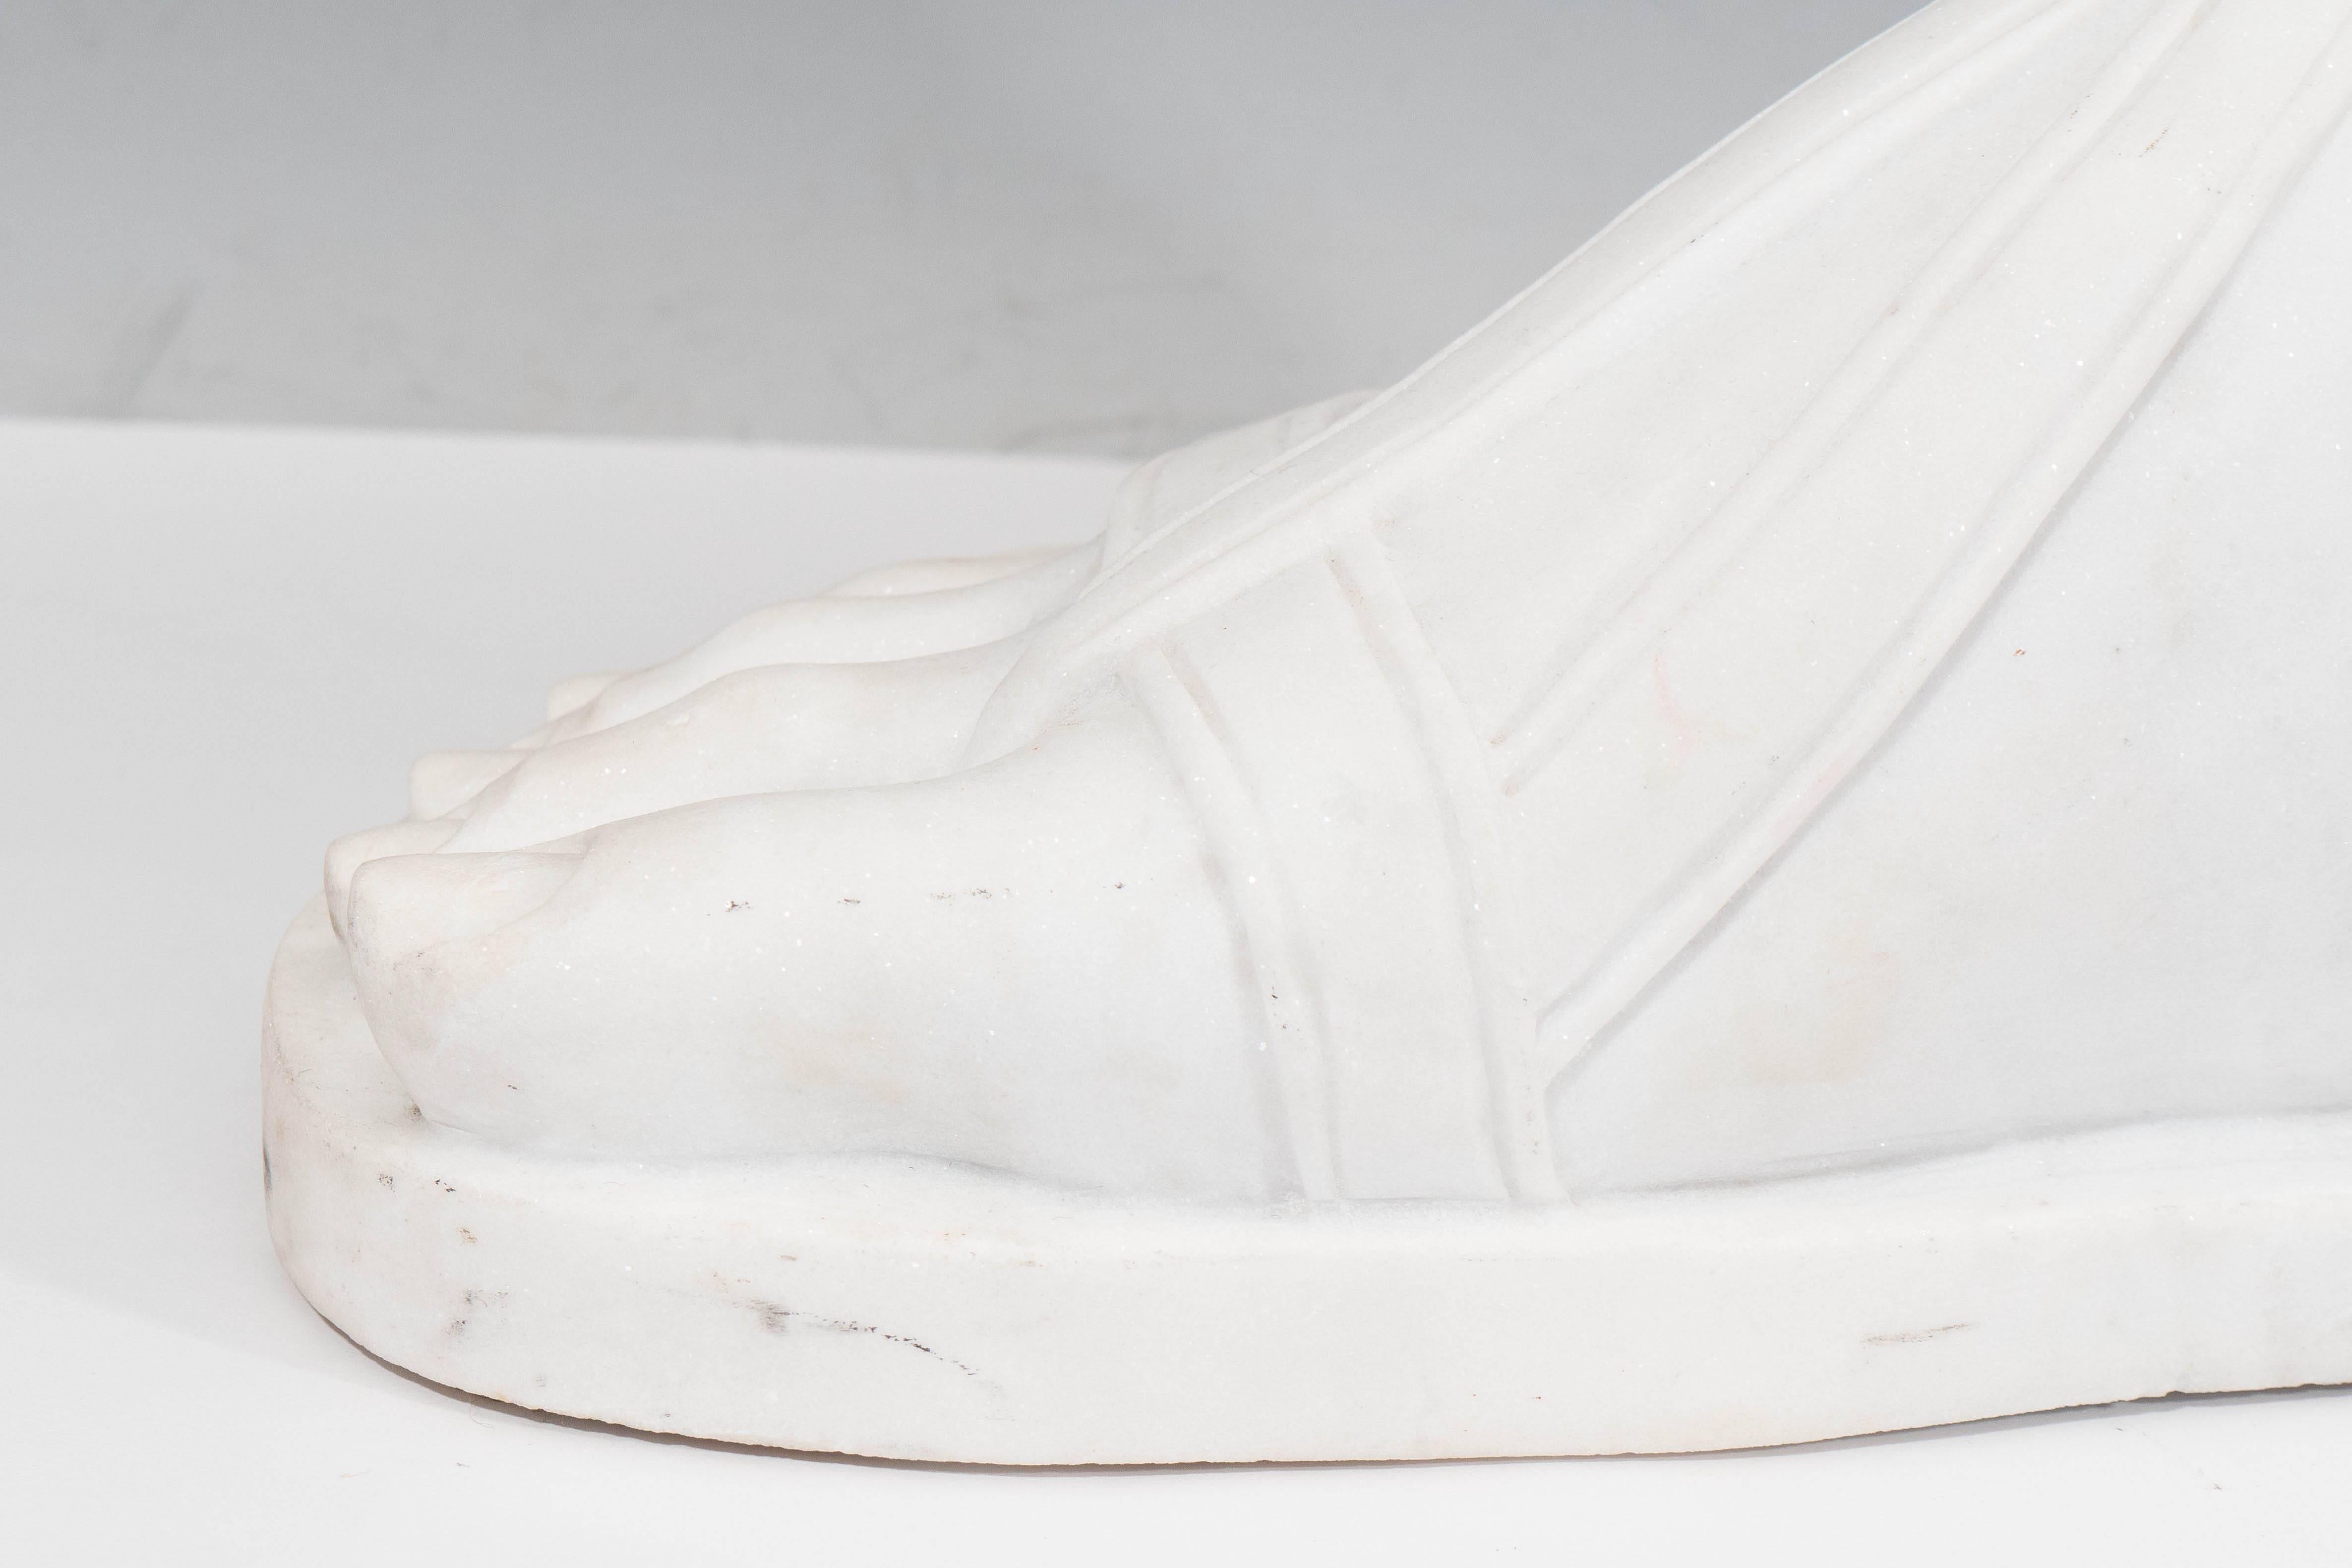 A 1970s Italian whimsical interpretation of the classical ‘Roman Centurion’ foot, carved in white Italian marble. Very good vintage condition, with some minor scuffing.